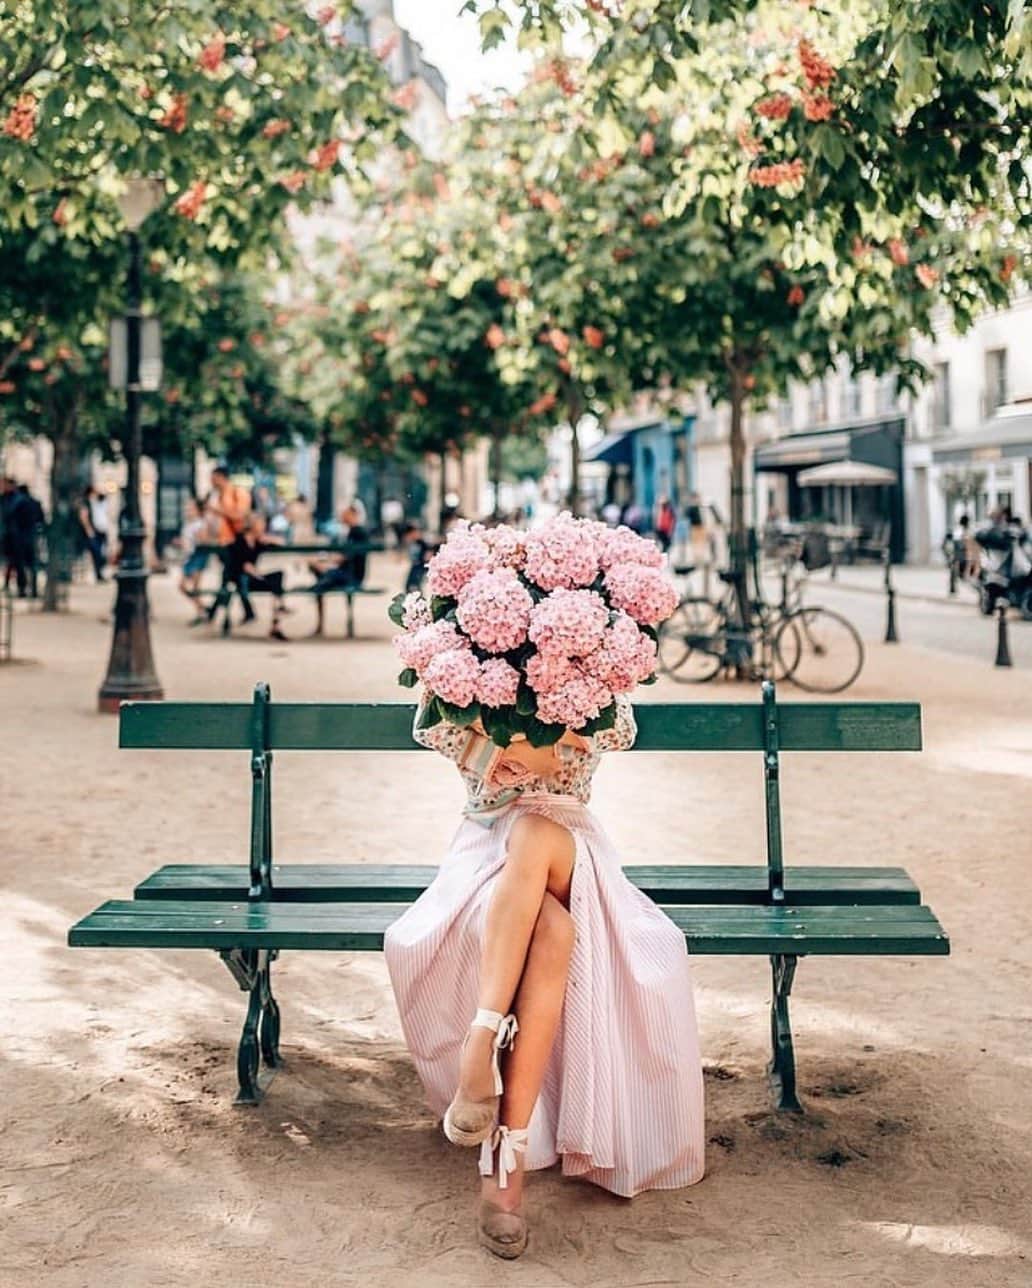 FRENCH GIRLのインスタグラム：「Joyeuse Saint-Valentin, French Girls 💓 However you are celebrating, we hope your day is full of love — be that for a special someone, friends, family, or (most importantly!) yourself. Do something that makes you feel loved today. Nourish your spirit and know you are worthy. We love you 💗  Photo by @katie.one 🥀   #ValentinesDay #DayofLove」